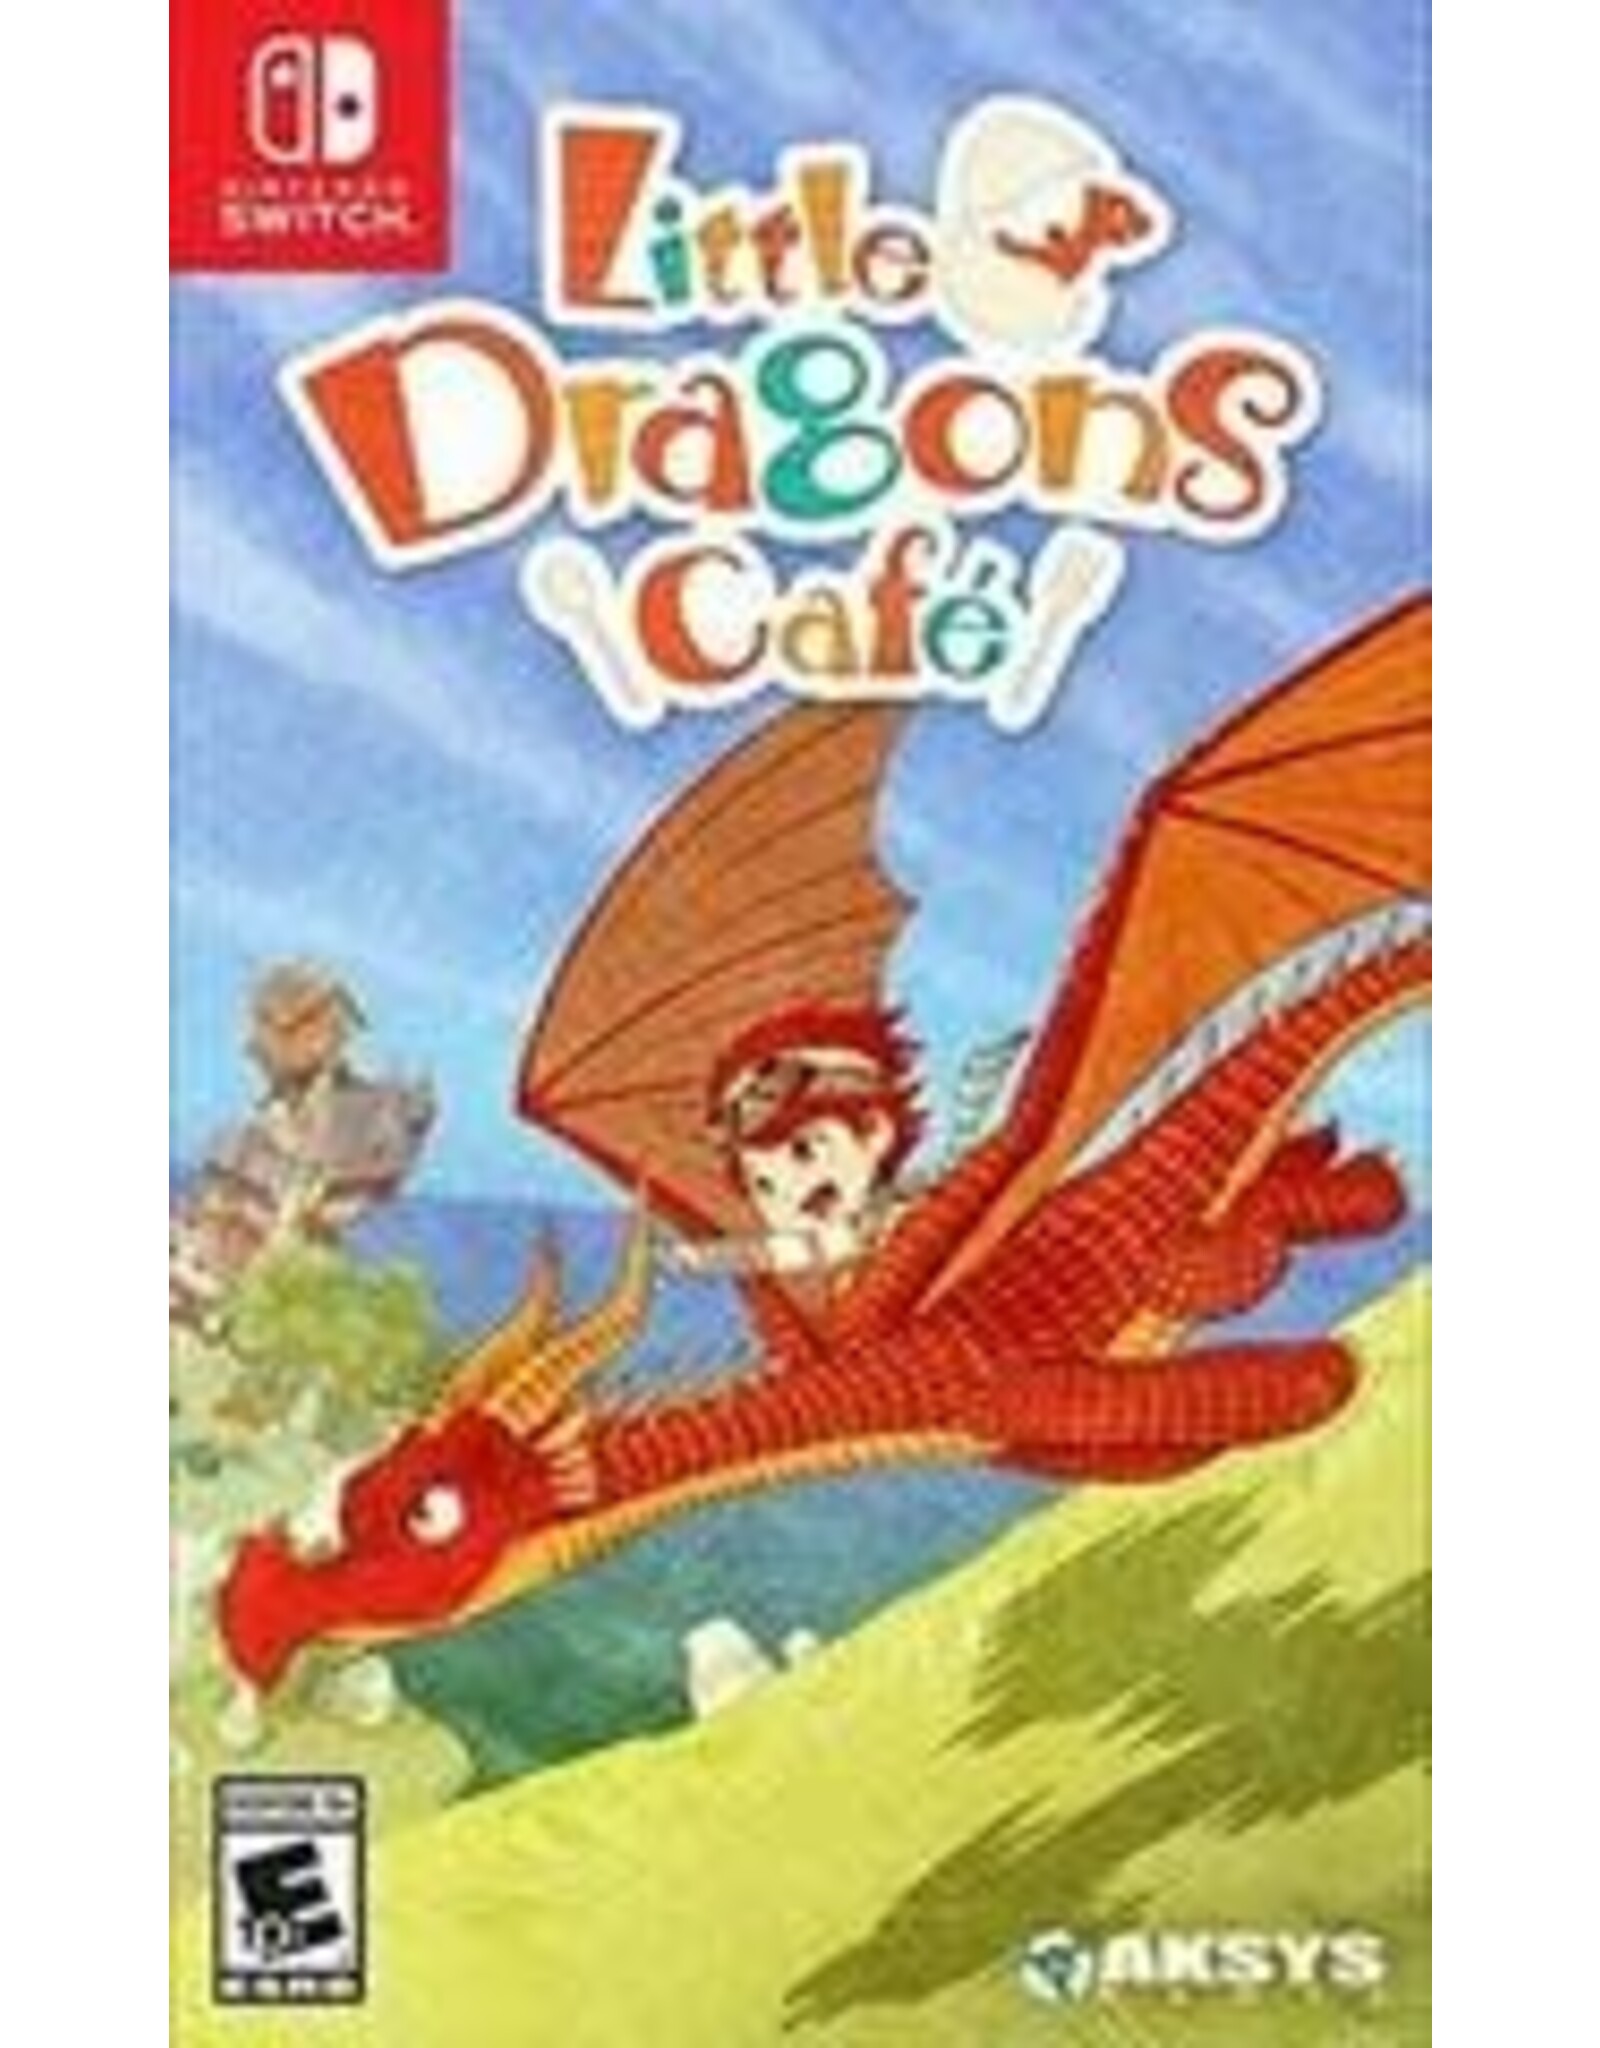 Nintendo Switch Little Dragons Cafe (Used, Cart Only)